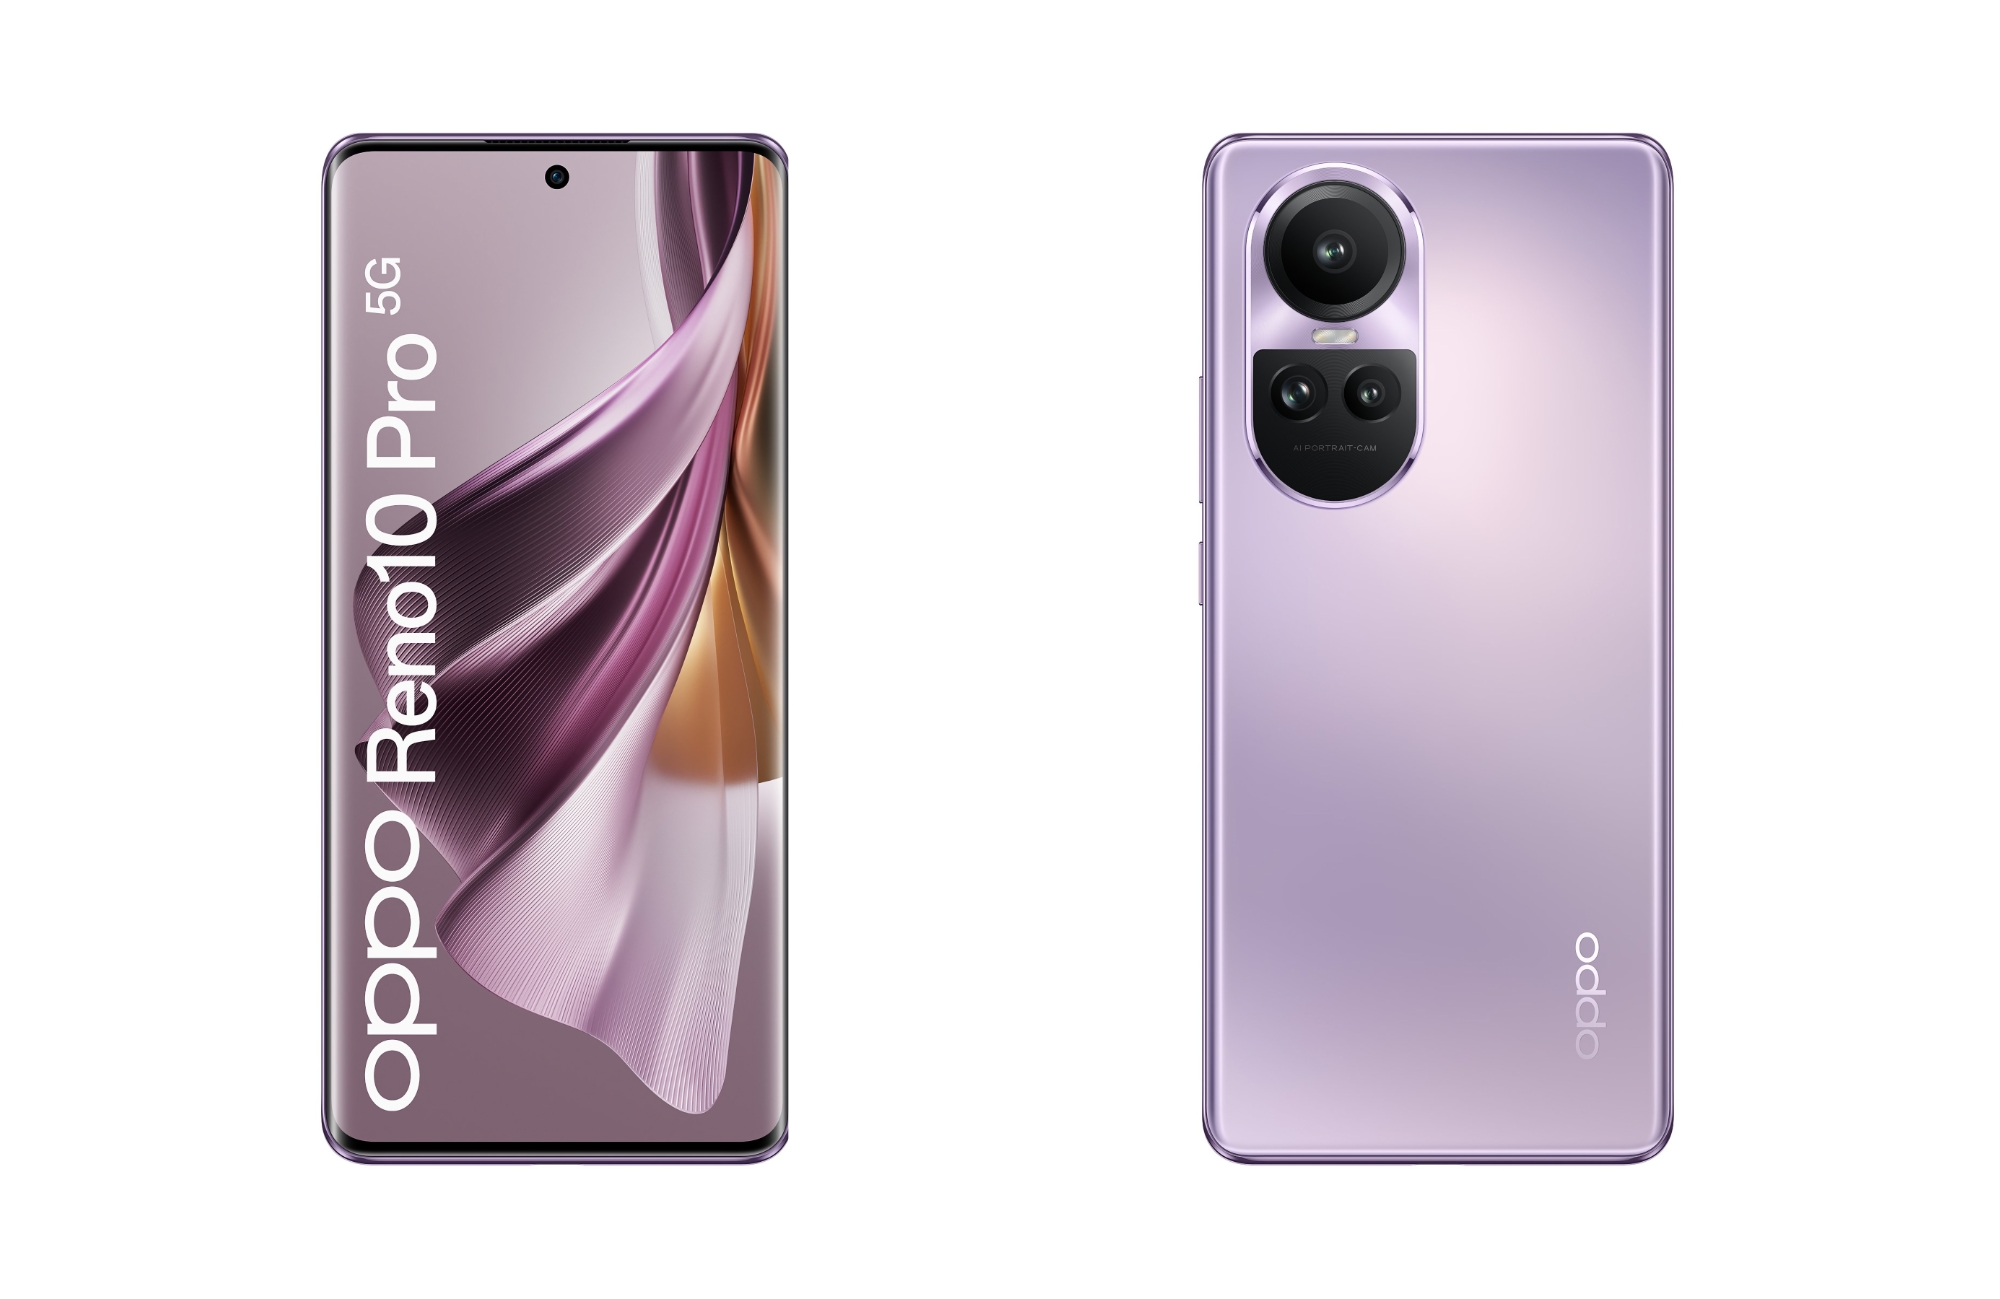 Insider reveals specs and shows what the global version of the OPPO Reno 10 Pro will look like